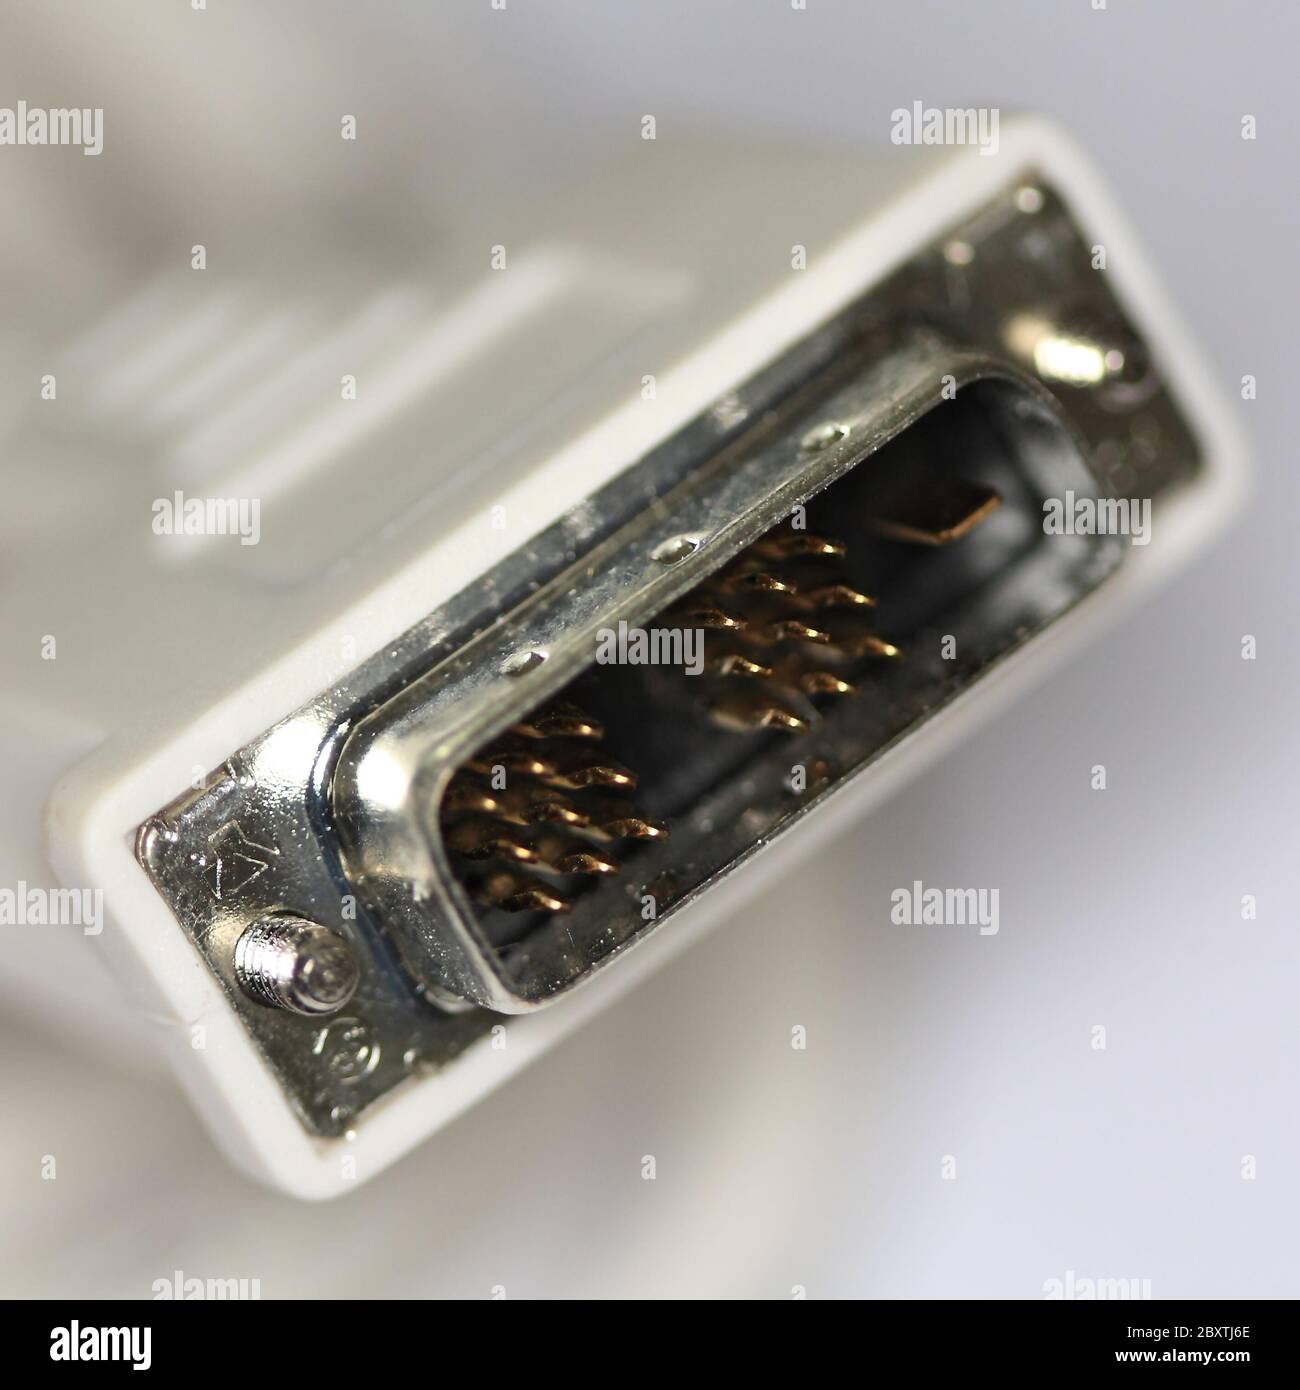 Monitor connector Stock Photo